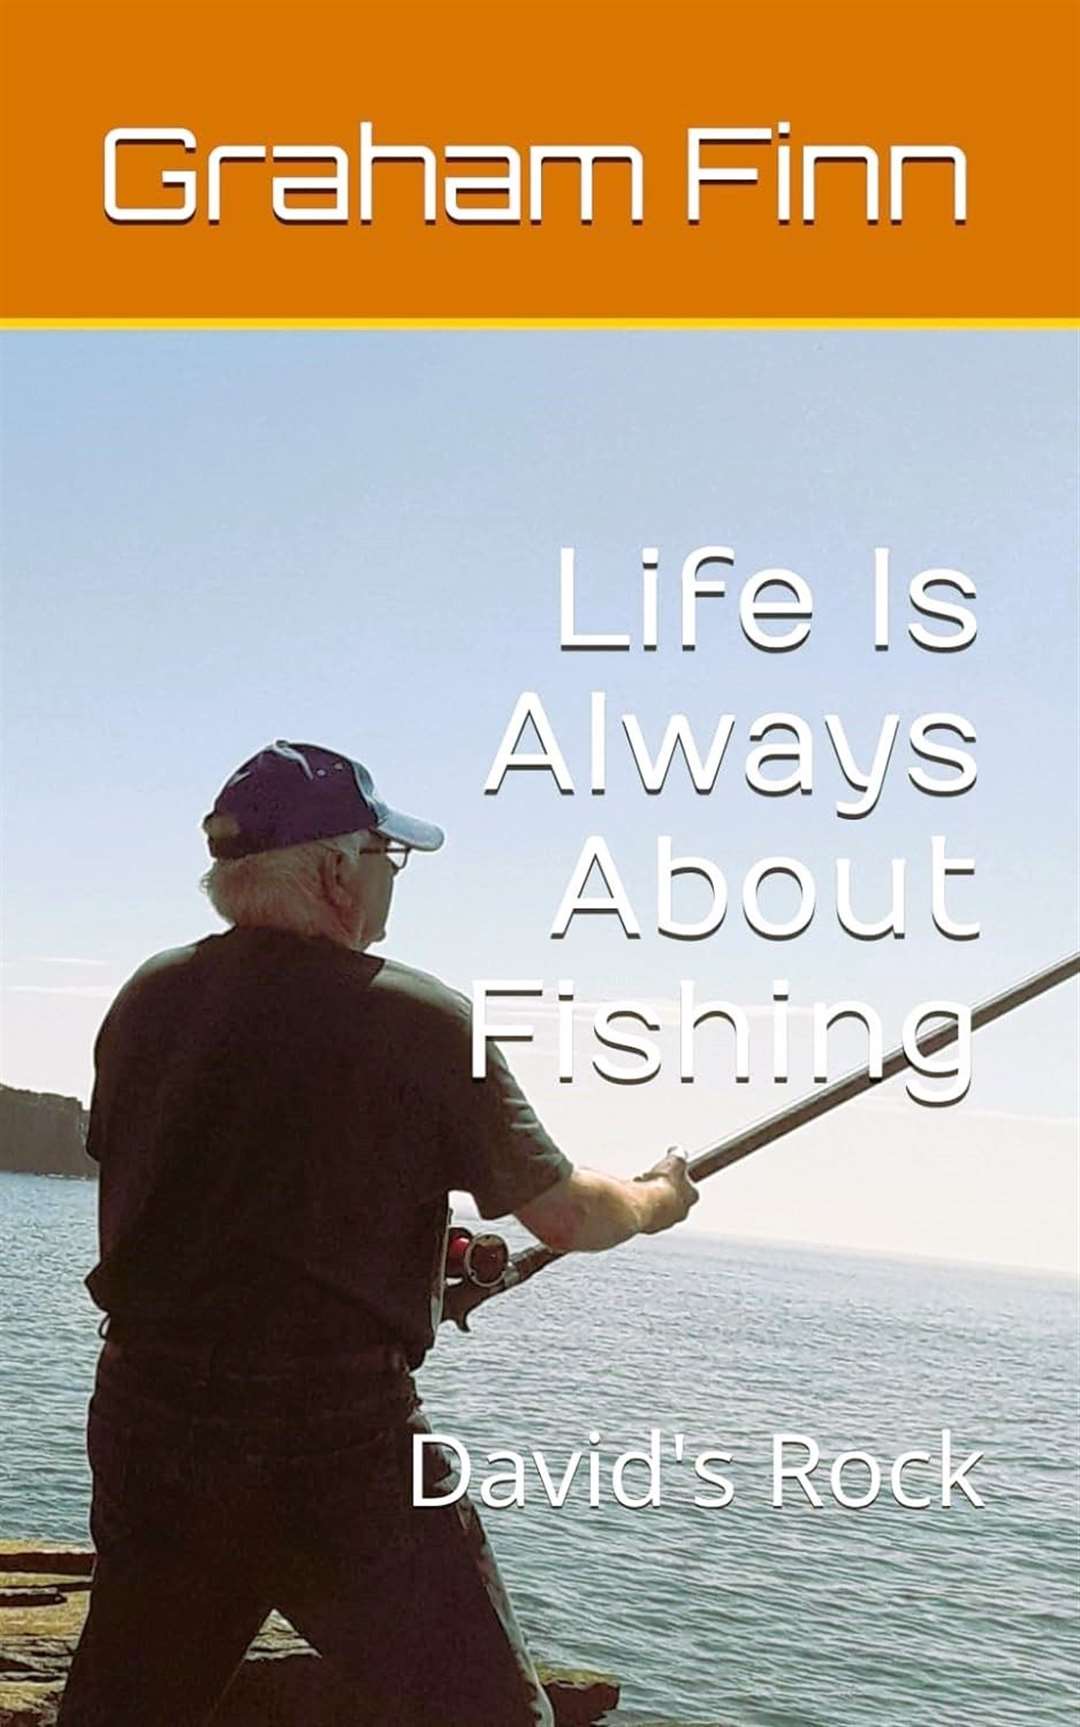 The cover of Graham Finn's new book 'Life is always about fishing'.